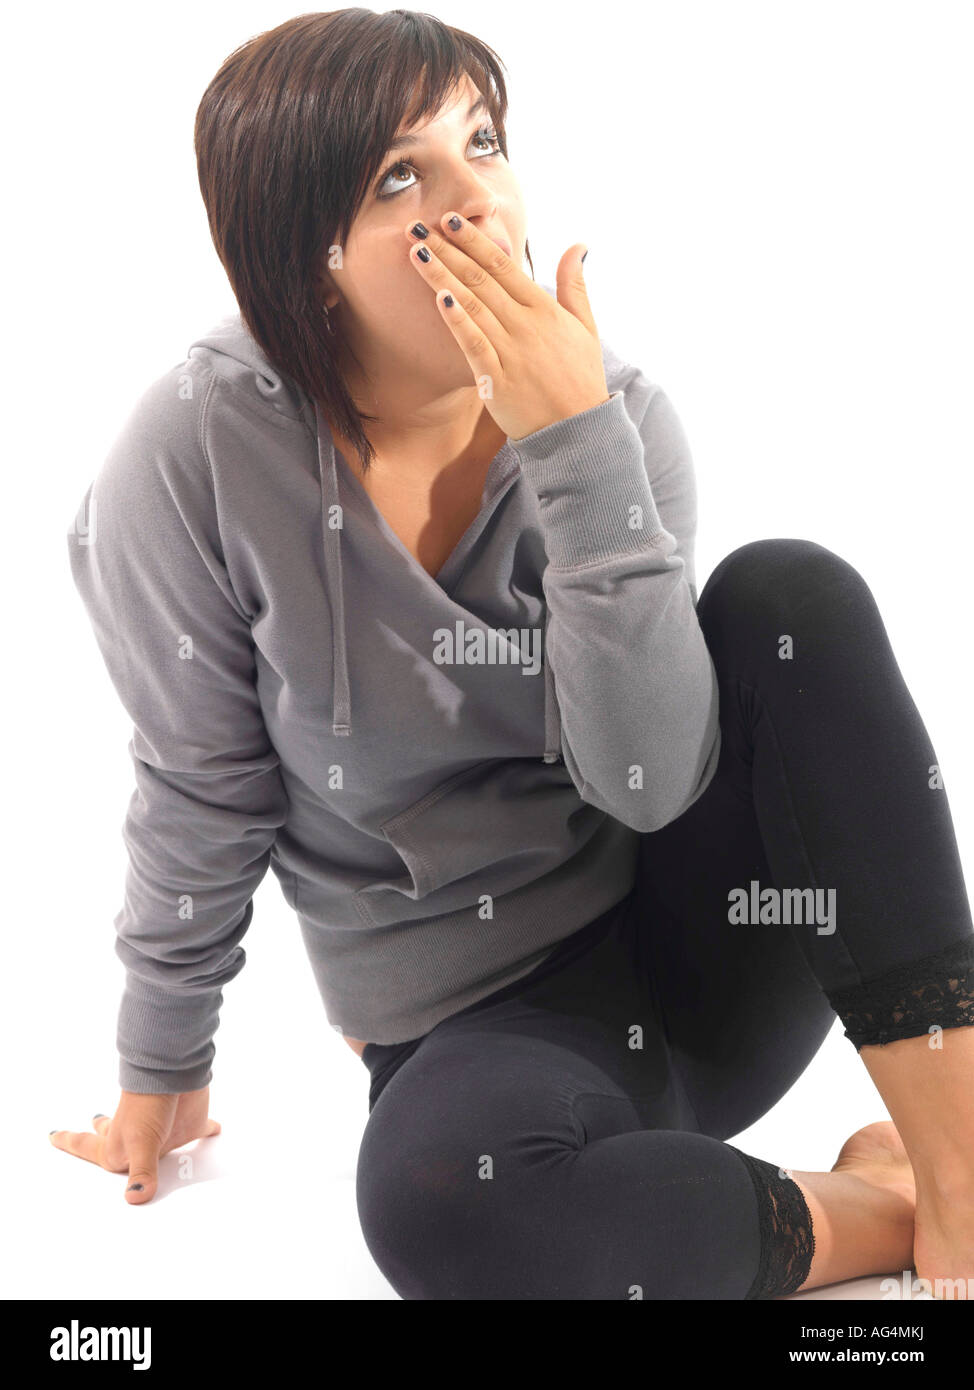 Woman Yawning Model Released Stock Photo